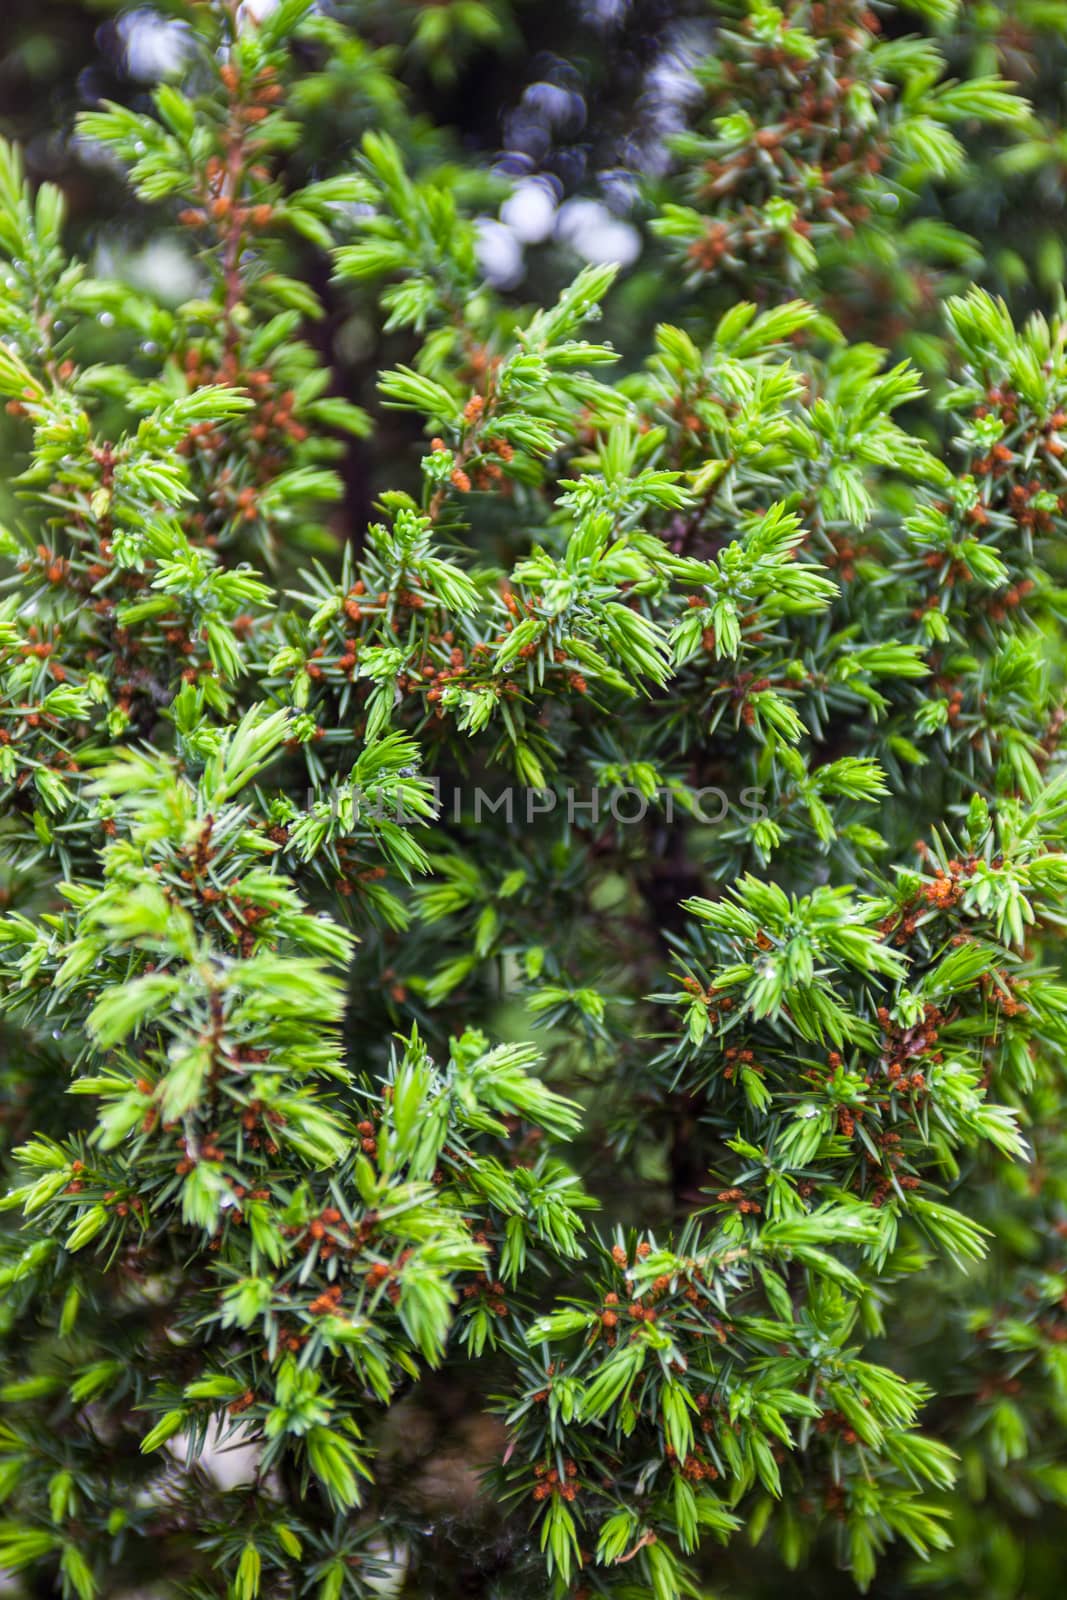 Conifer branches. Tiny cones and young light green shoots by rootstocks